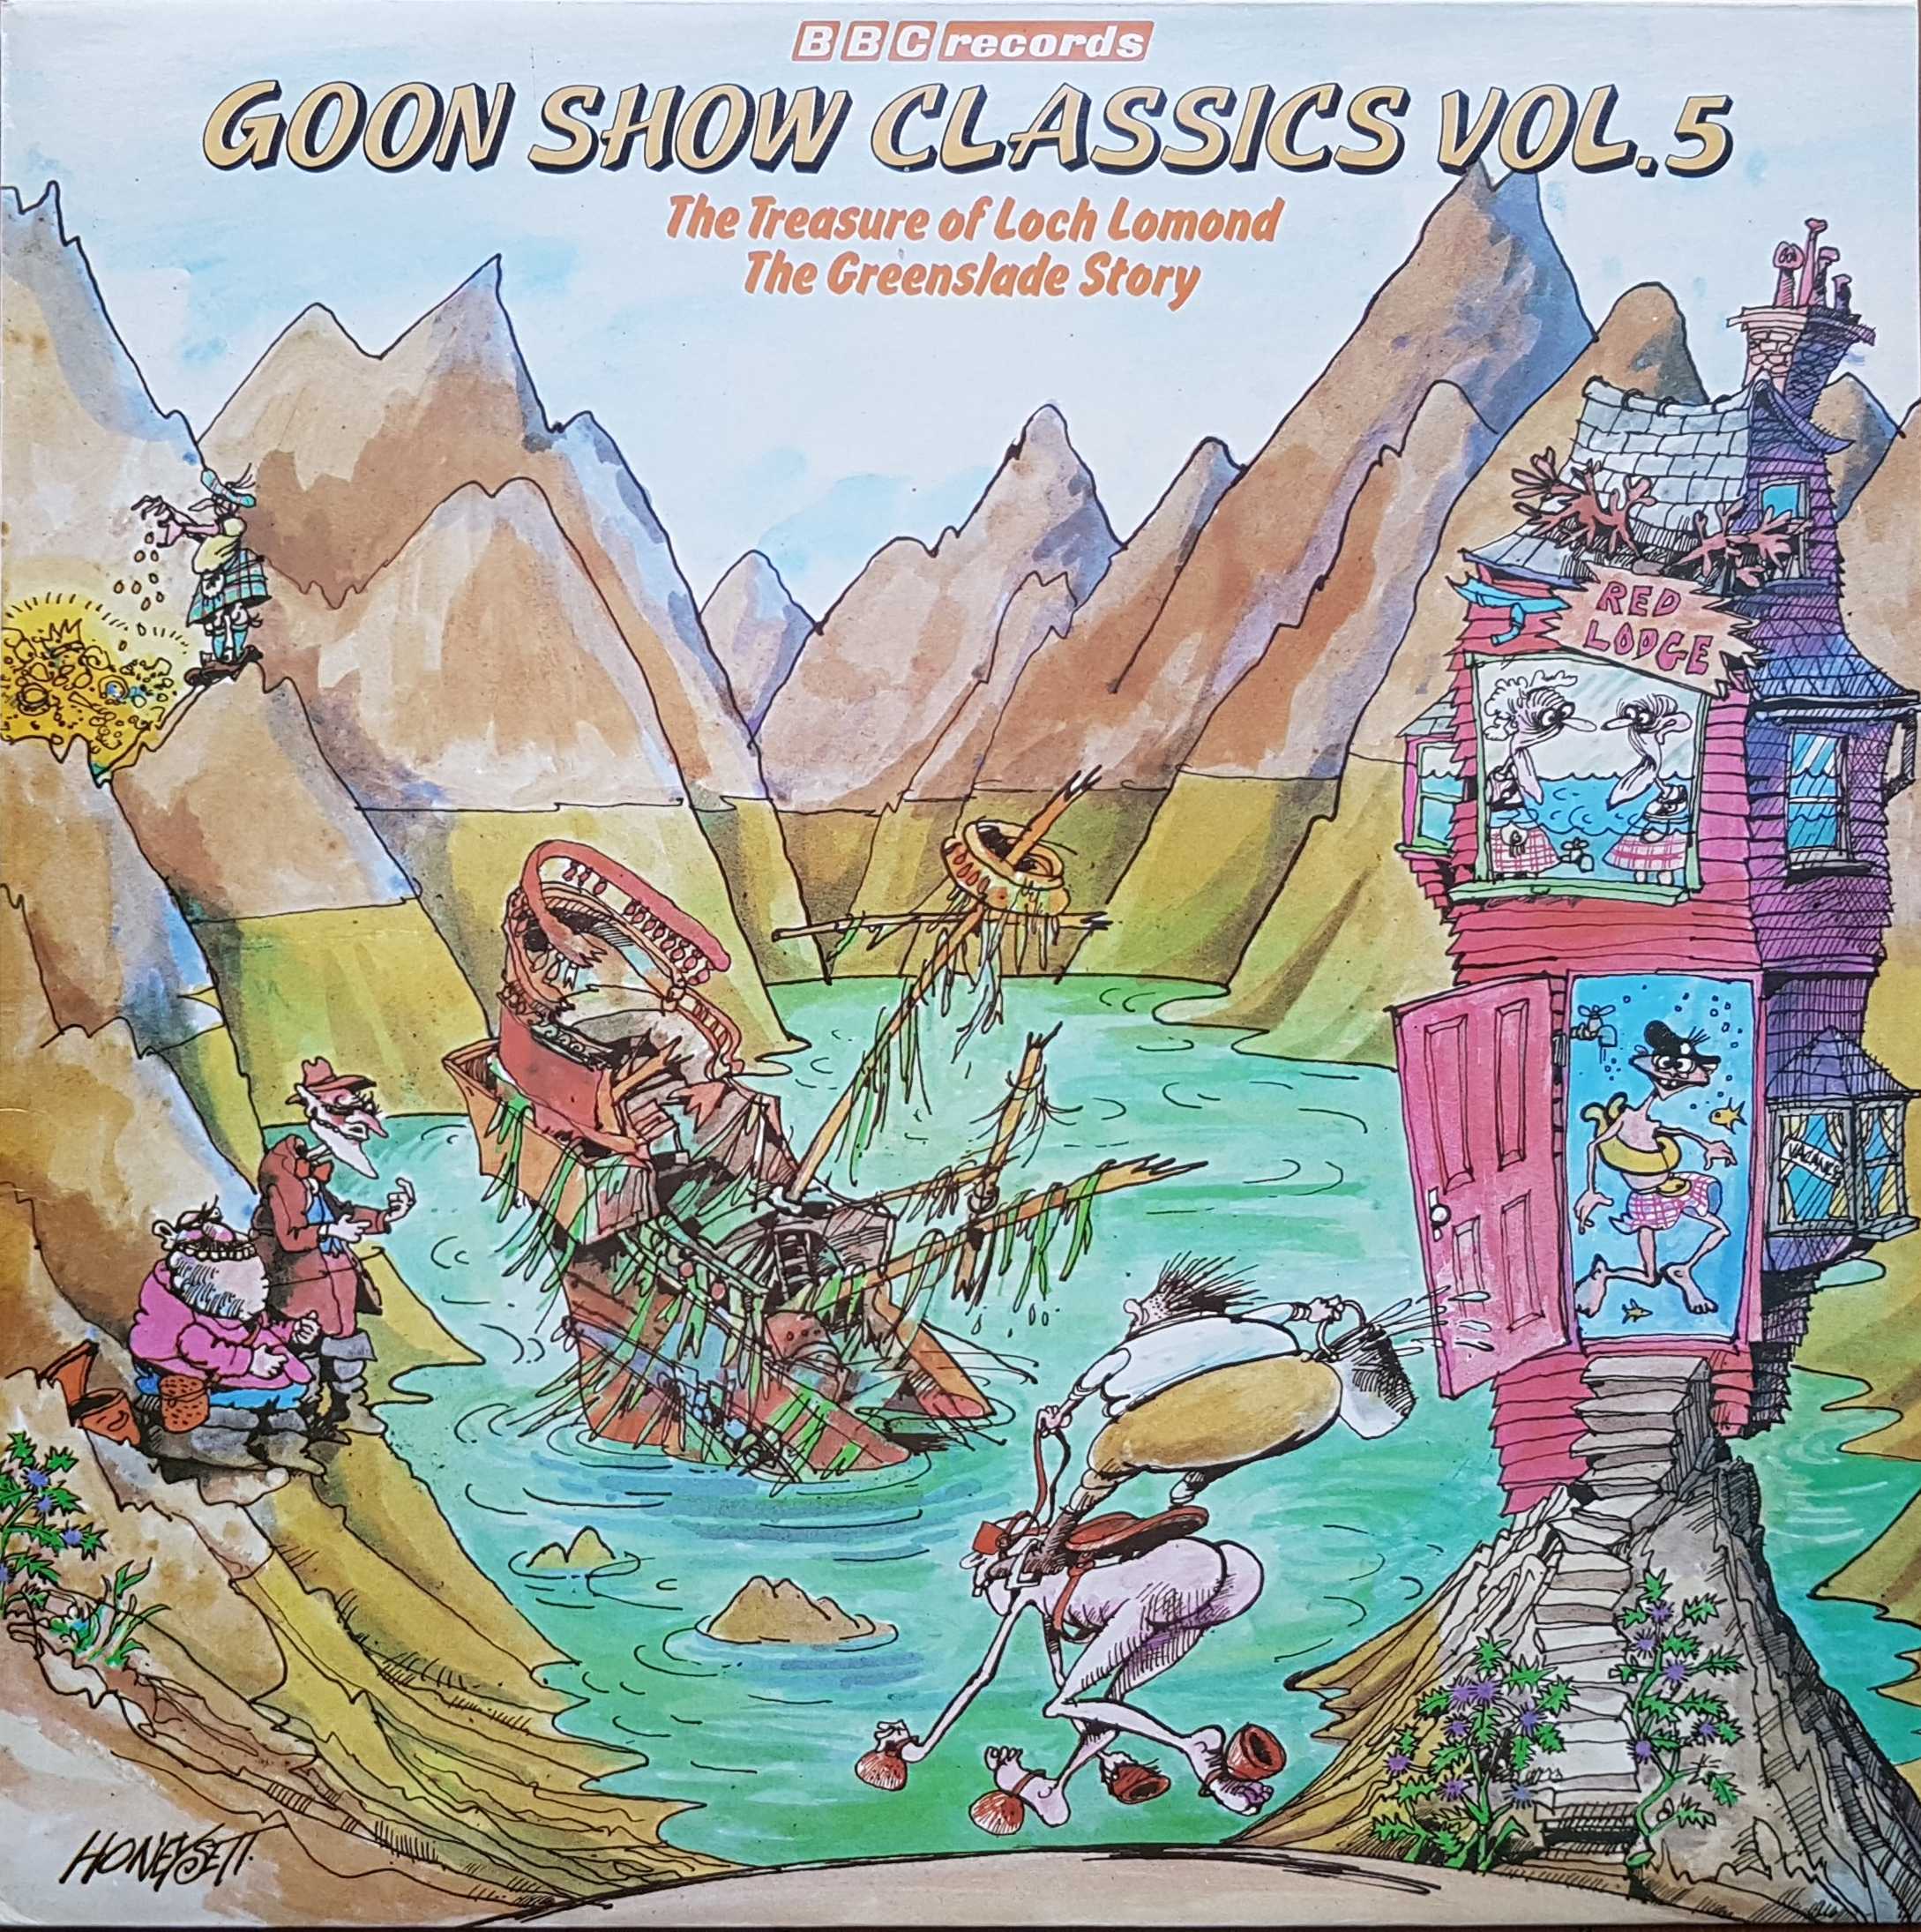 Picture of REB 339 Goon show classics - Volume 5 by artist Spike Milligan